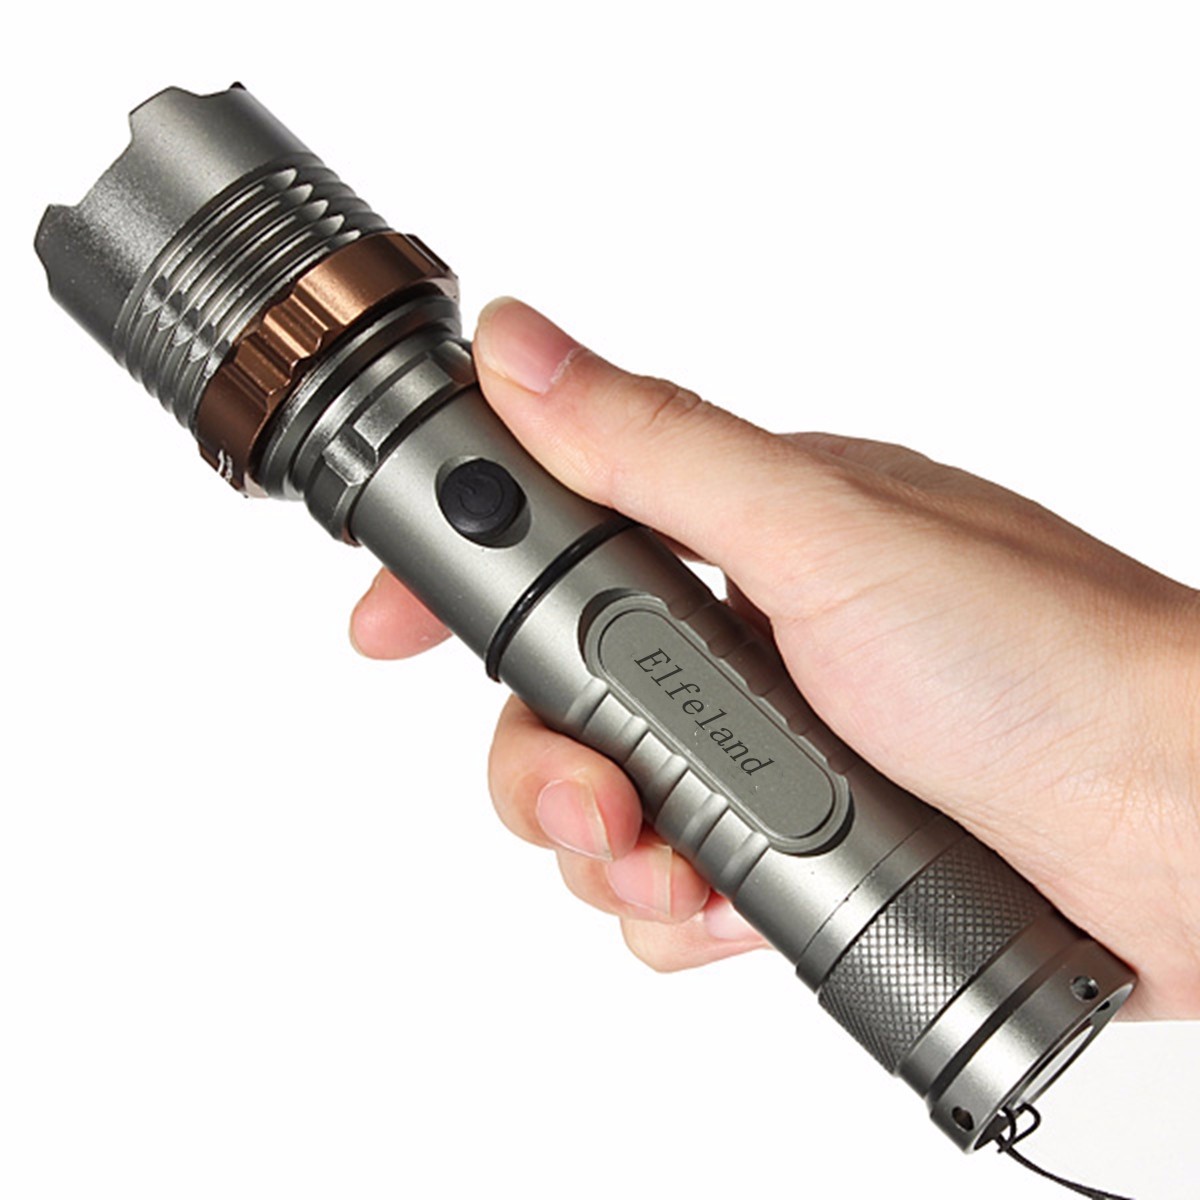 2600LM-T6-LED-Flashlight-Zoomable-5Modes-18650-Torch-Super-Bright-Torch-Lamp-For-Camping-Hiking-Cycl-1934827-11